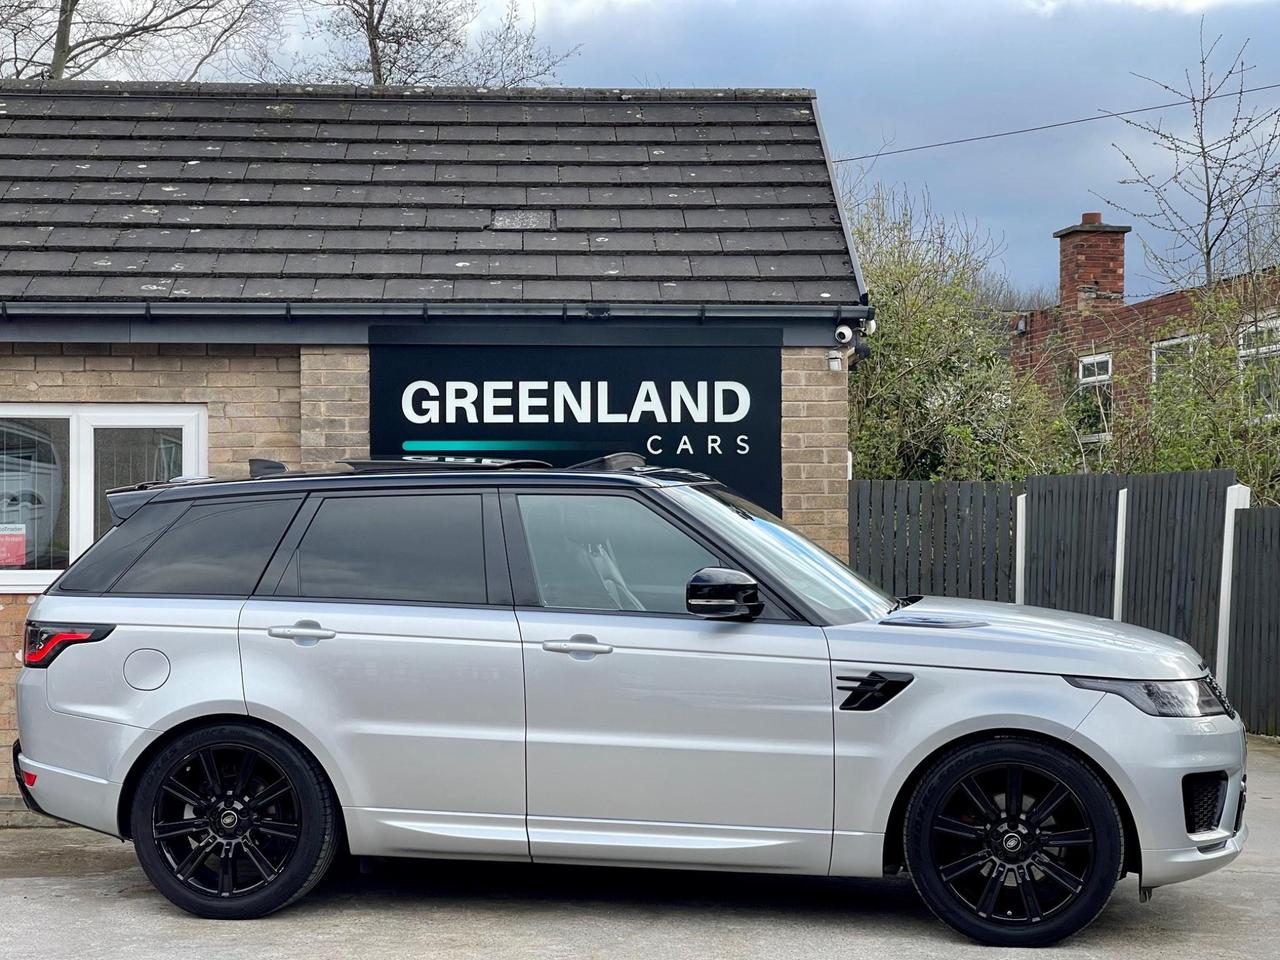 Used 2020 Land Rover Range Rover Sport for sale in Sheffield